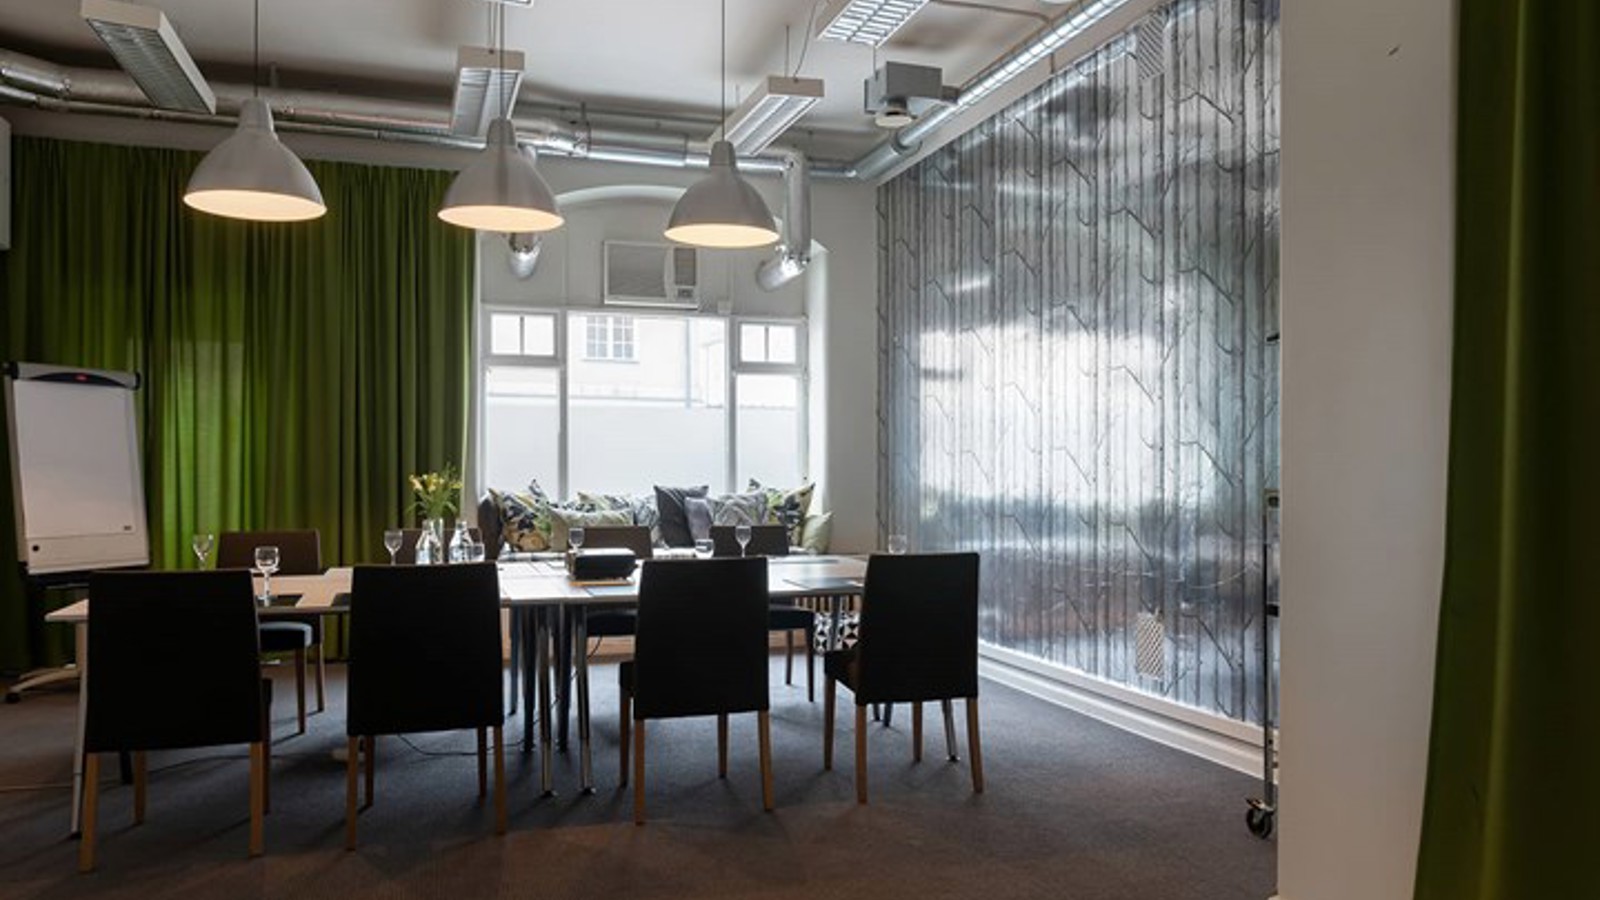 Conference room with board seating, dark chairs and green draperies